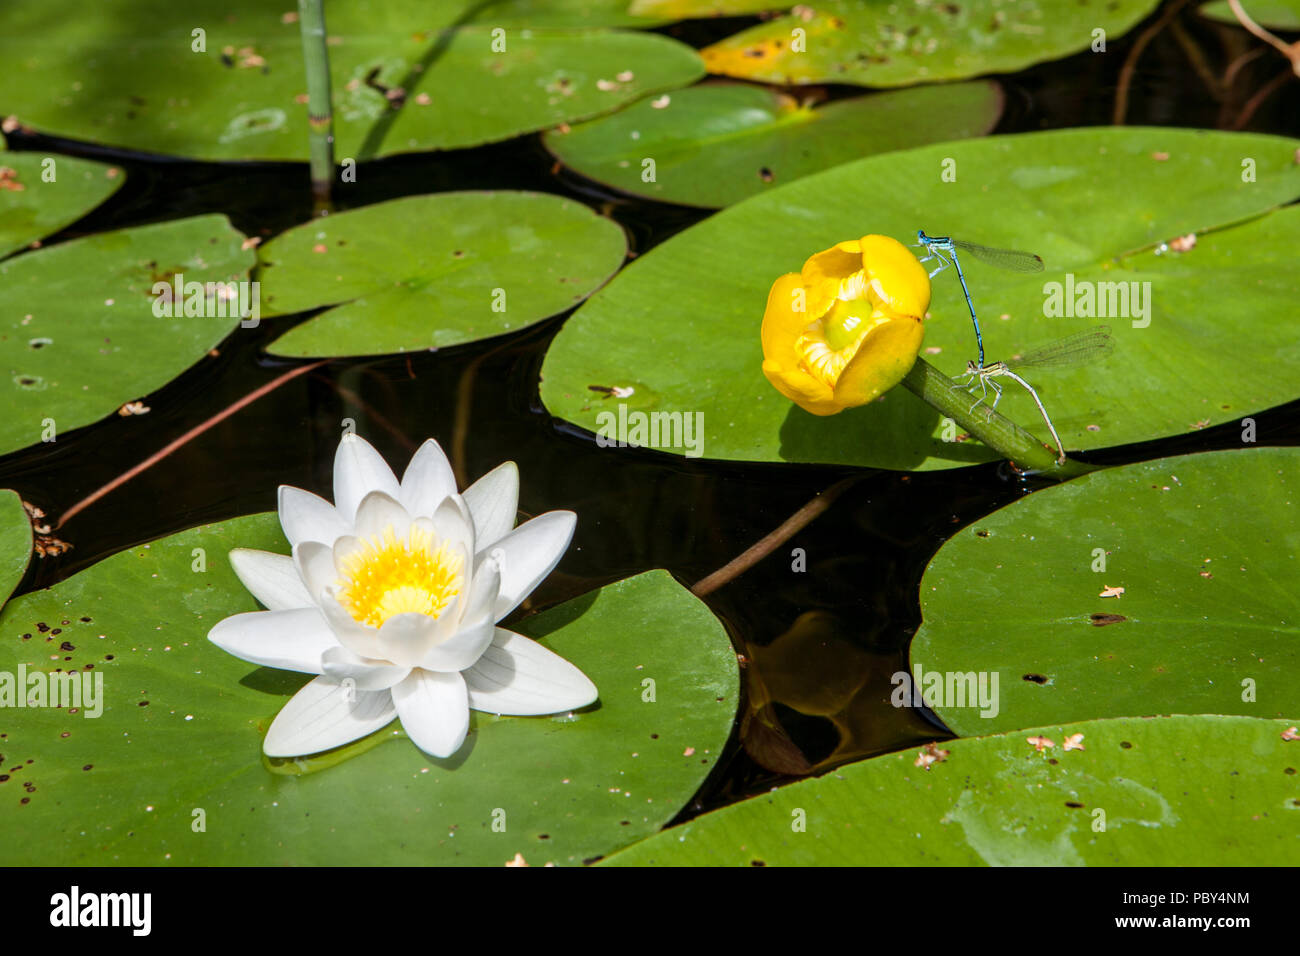 Beautiful shining lotus flower, white nymphaea alba or water lily among green leaves with yellow pollen and dragonflies making love on a yellow flower Stock Photo